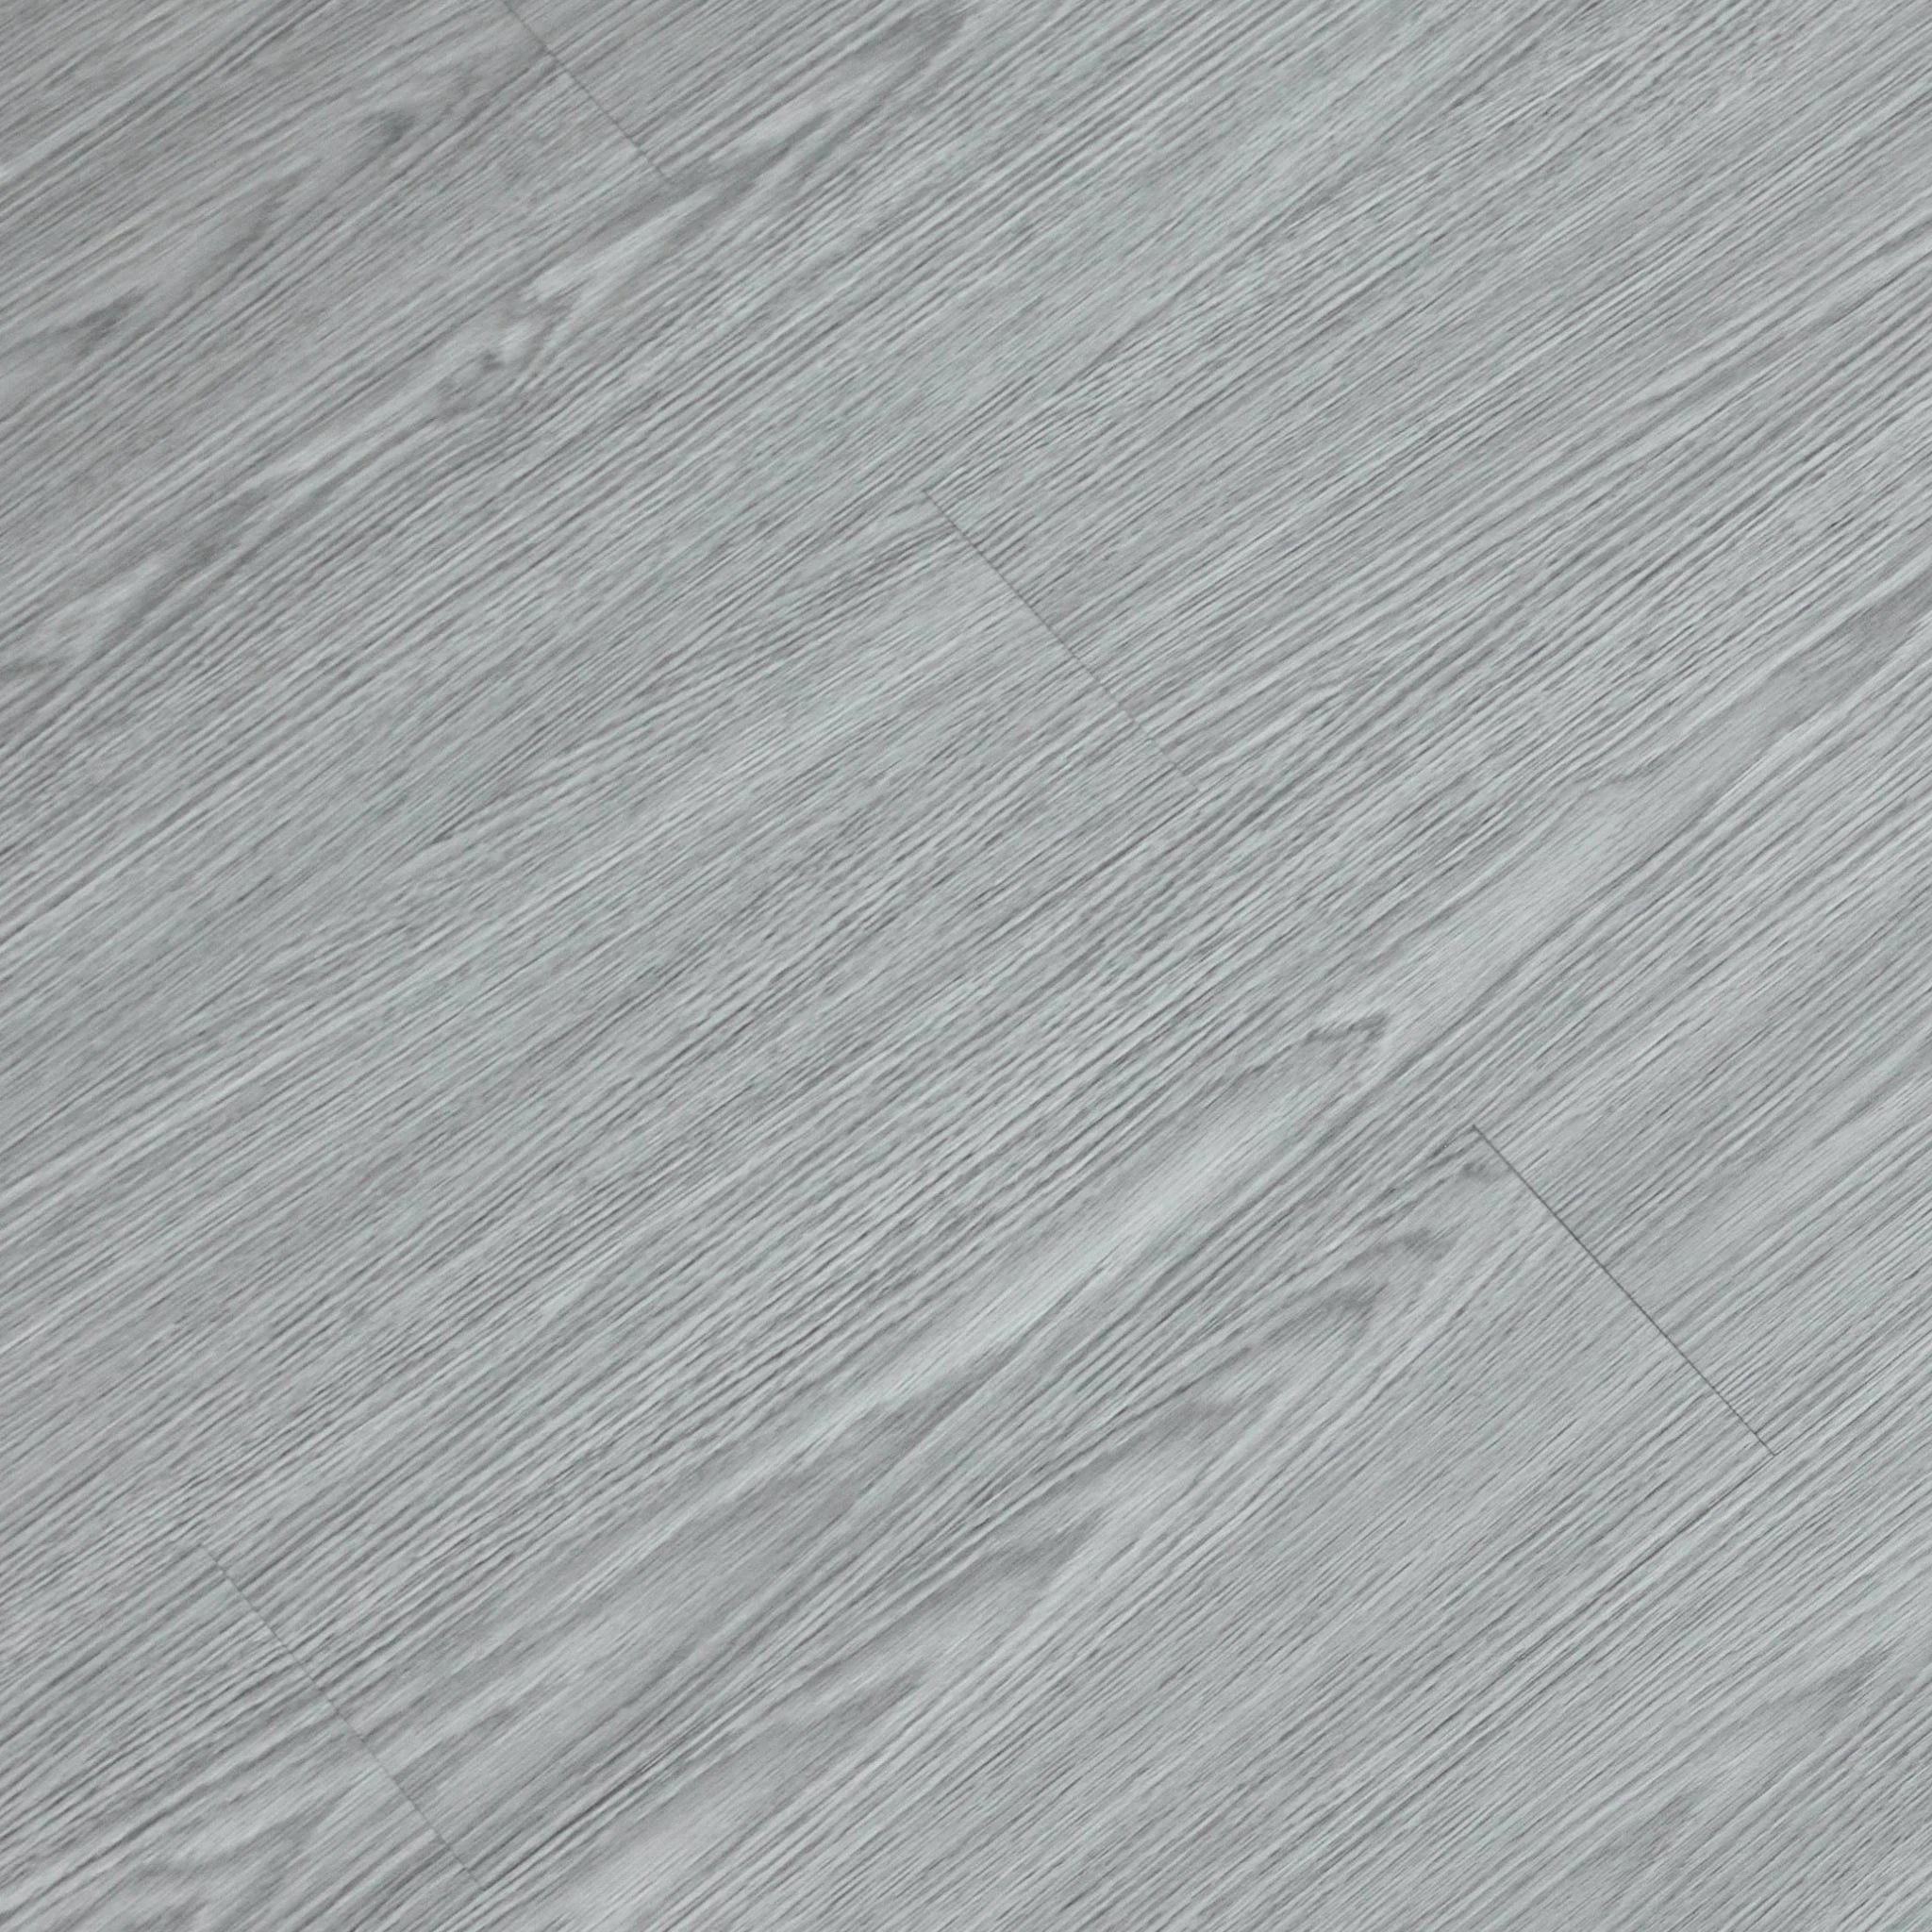 close-up of a wood-effect vinyl plank in light grey